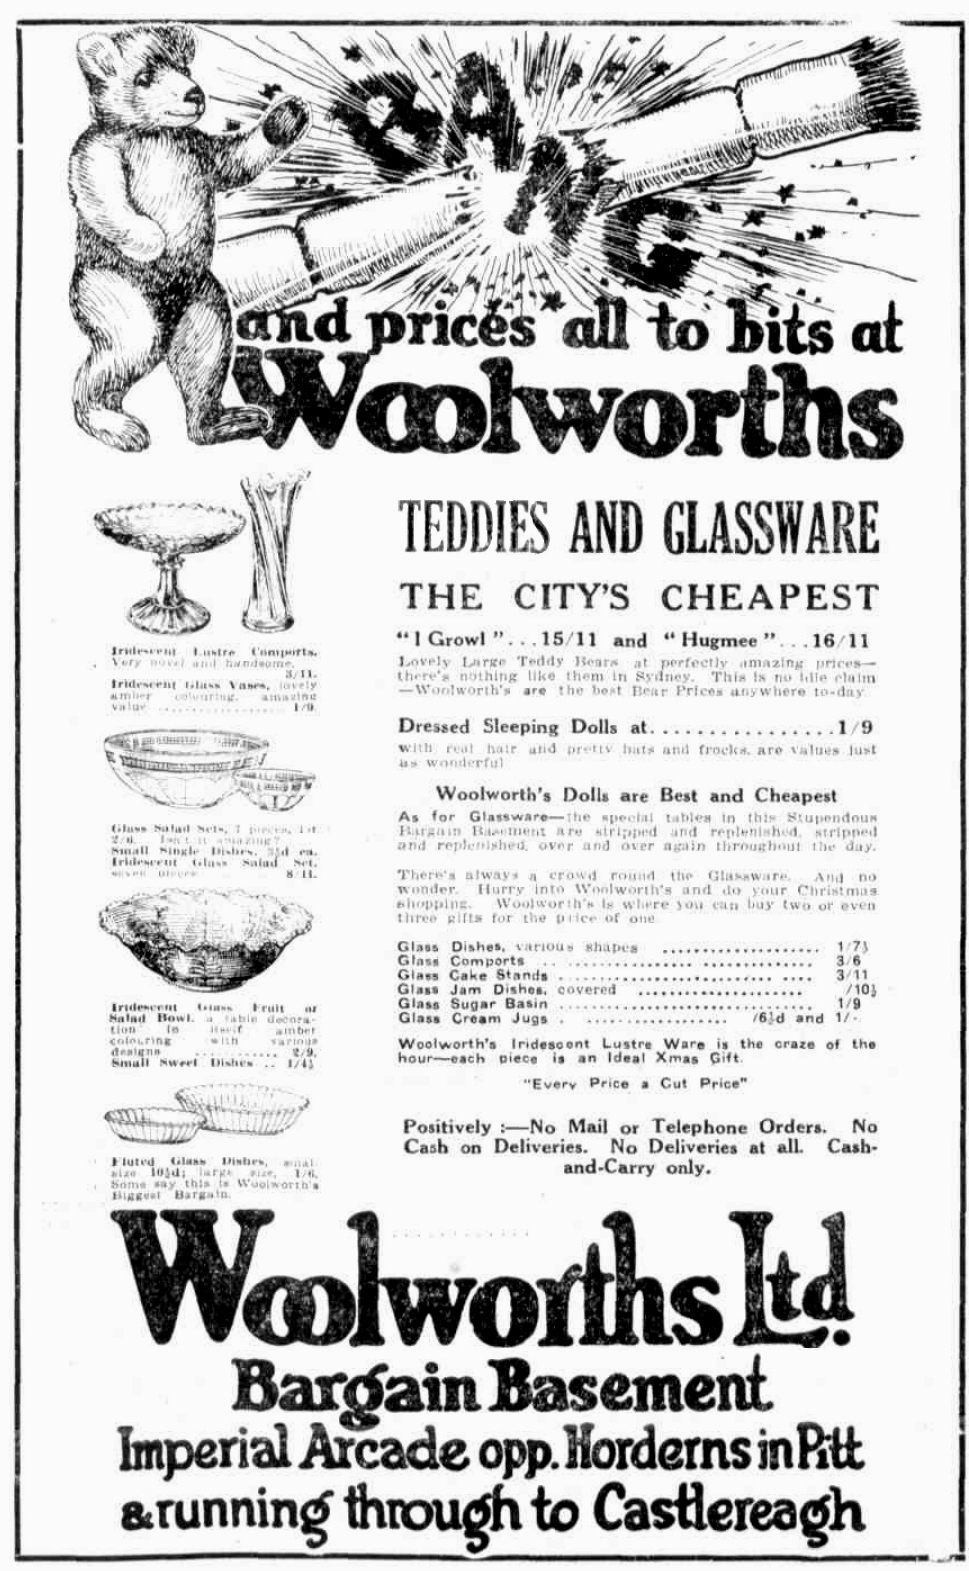 Woolworths ad 1924